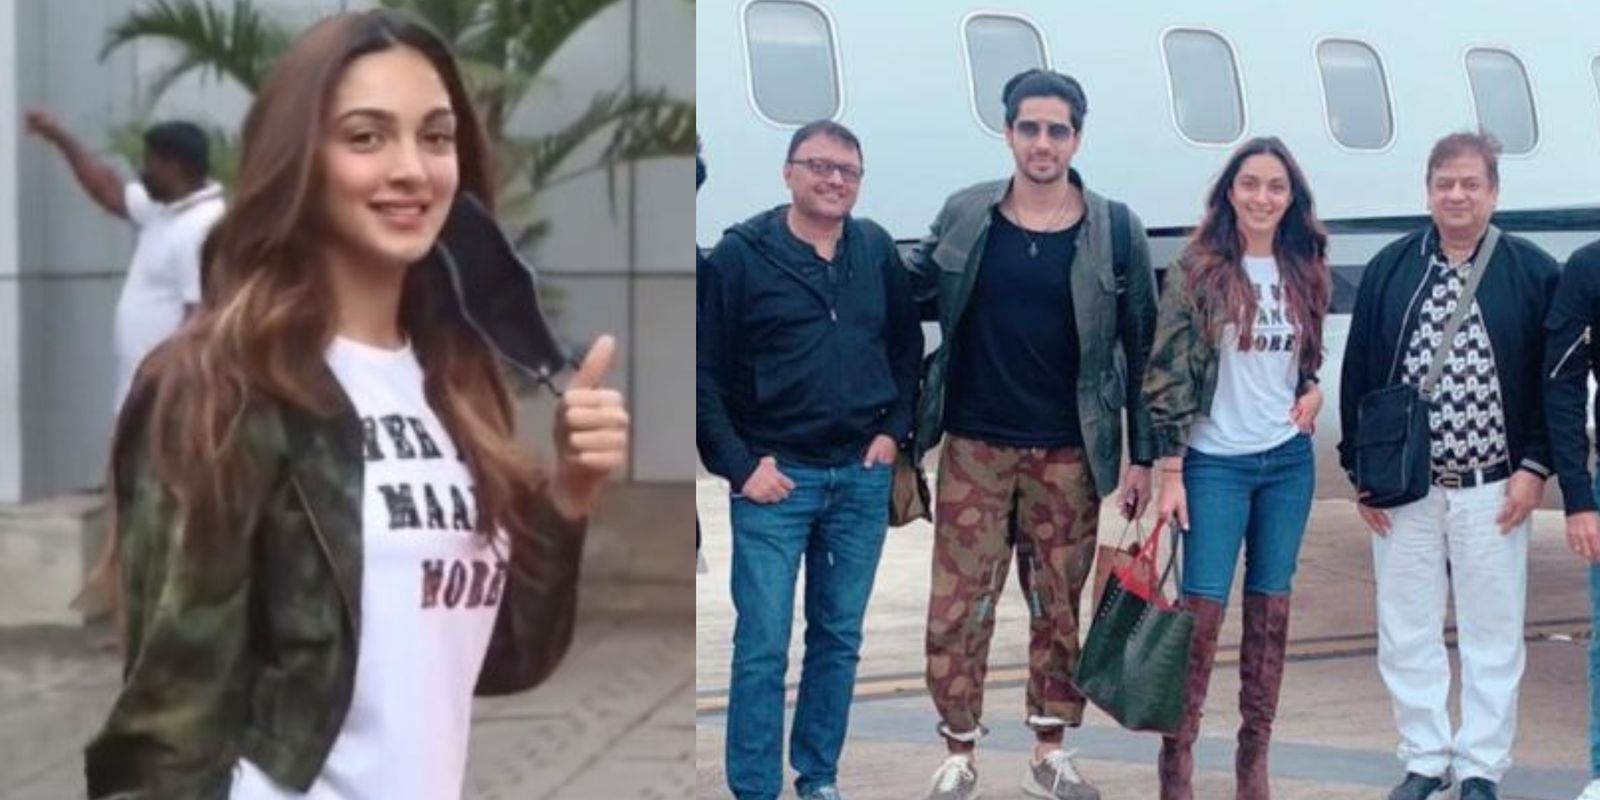 Kiara Advani sports a t-shirt that says ‘Yeh Dil Maange More’ as she jets off to Kargil for Shershaah trailer launch